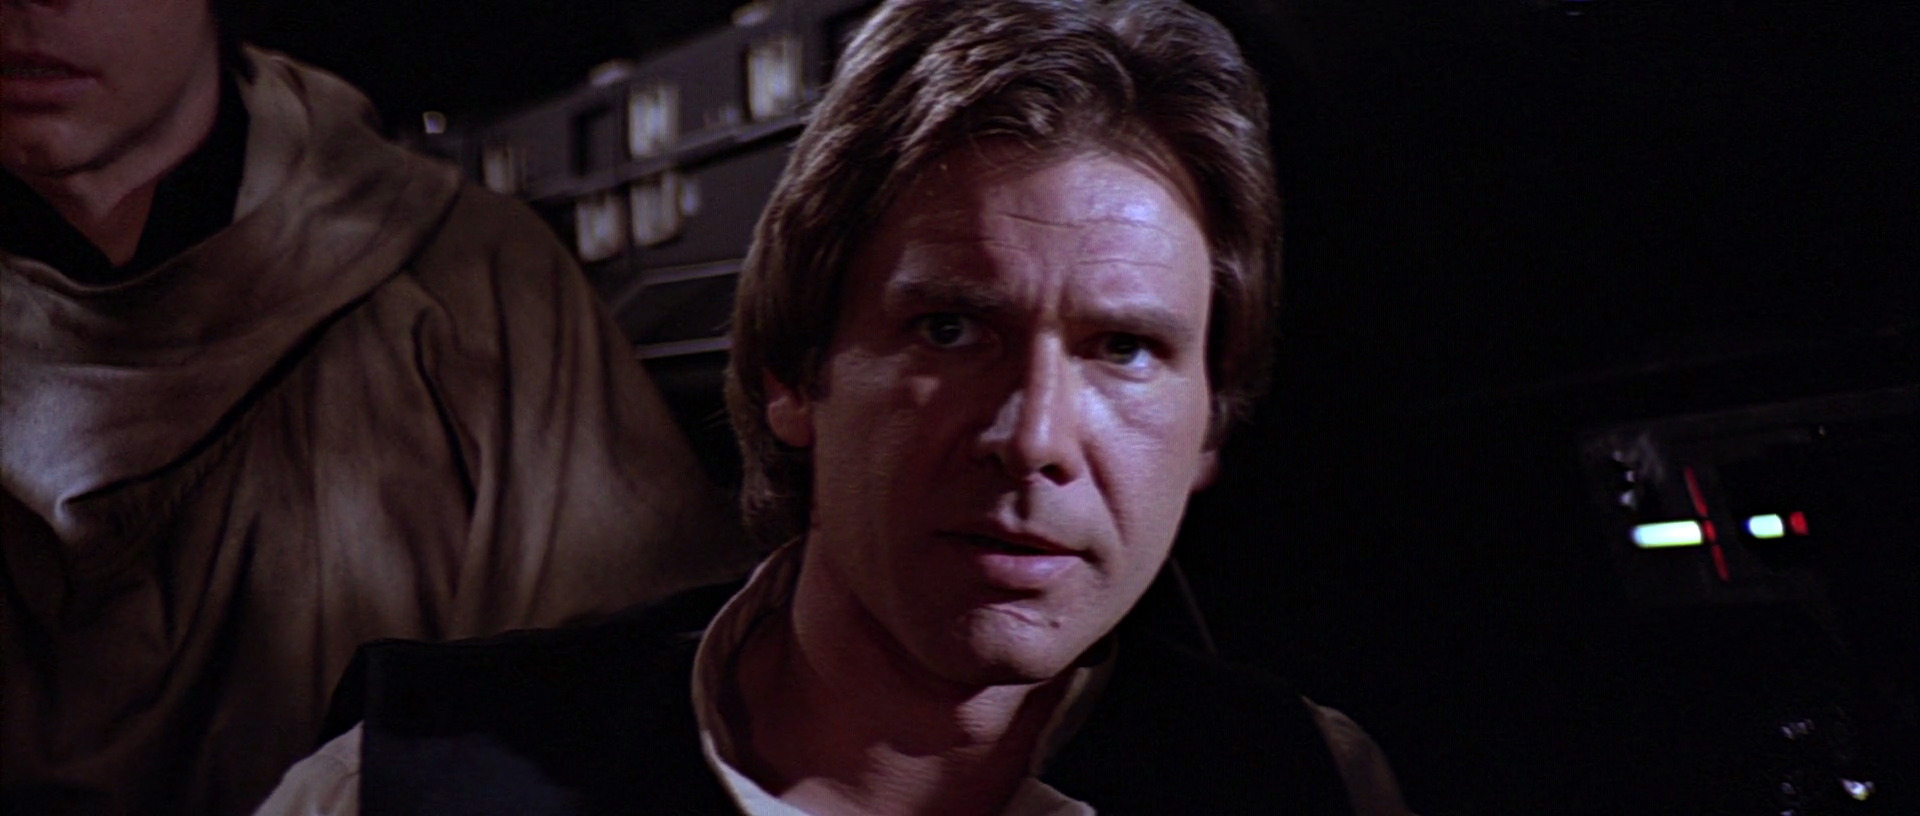 Star Wars: The Force Awakens - Here's What Happened To Han Solo After Return of the Jedi